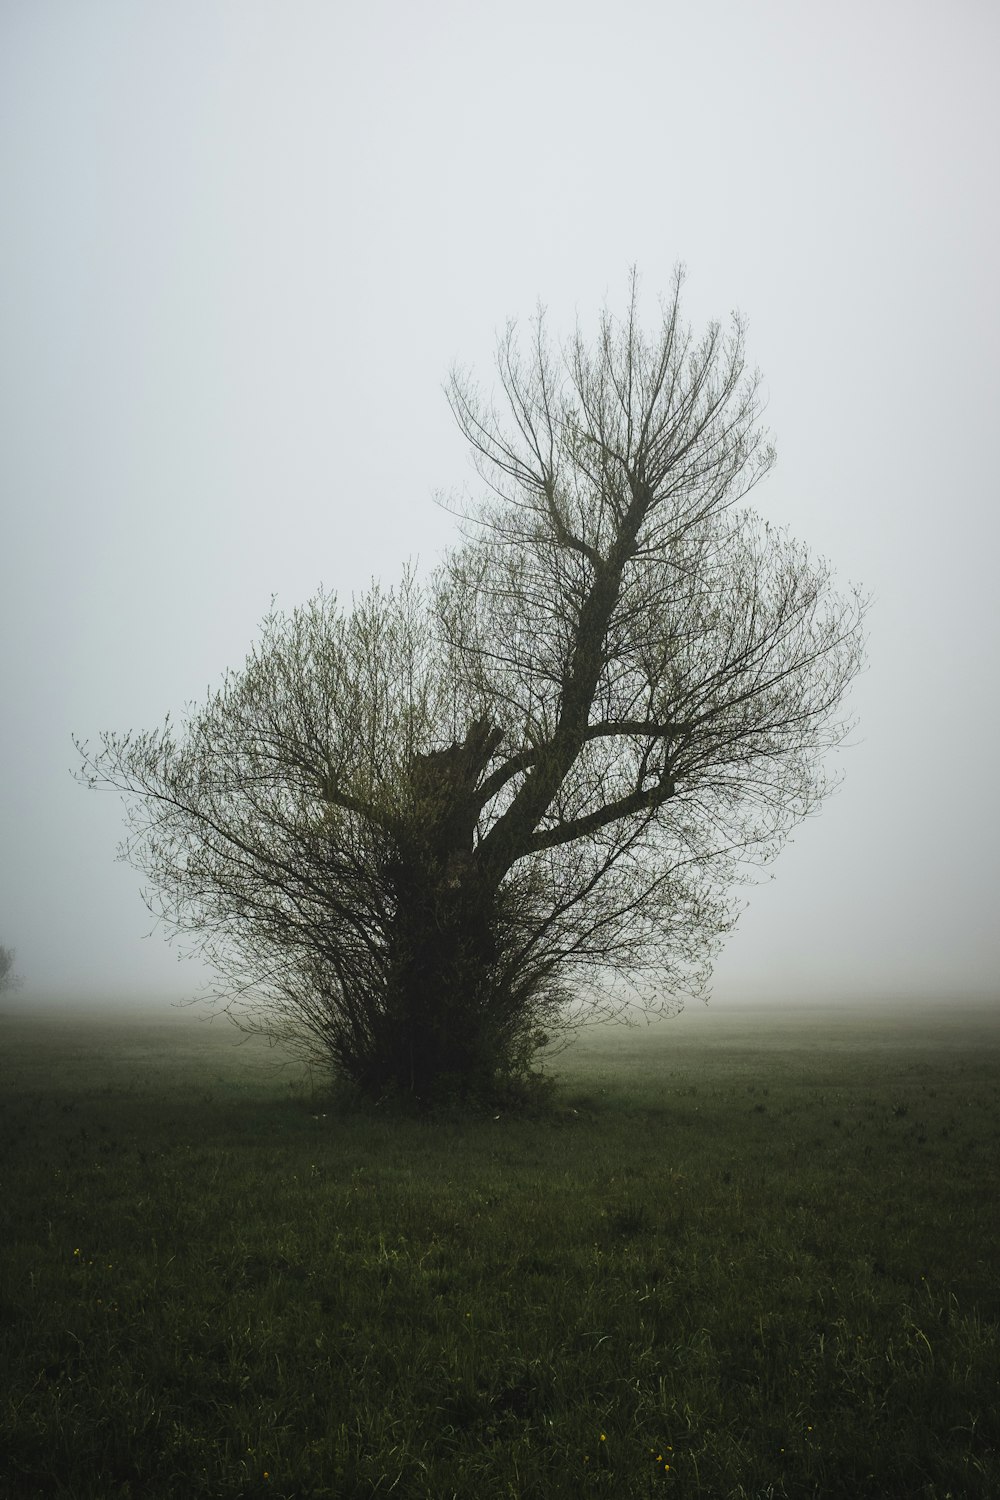 a foggy field with a tree in the foreground